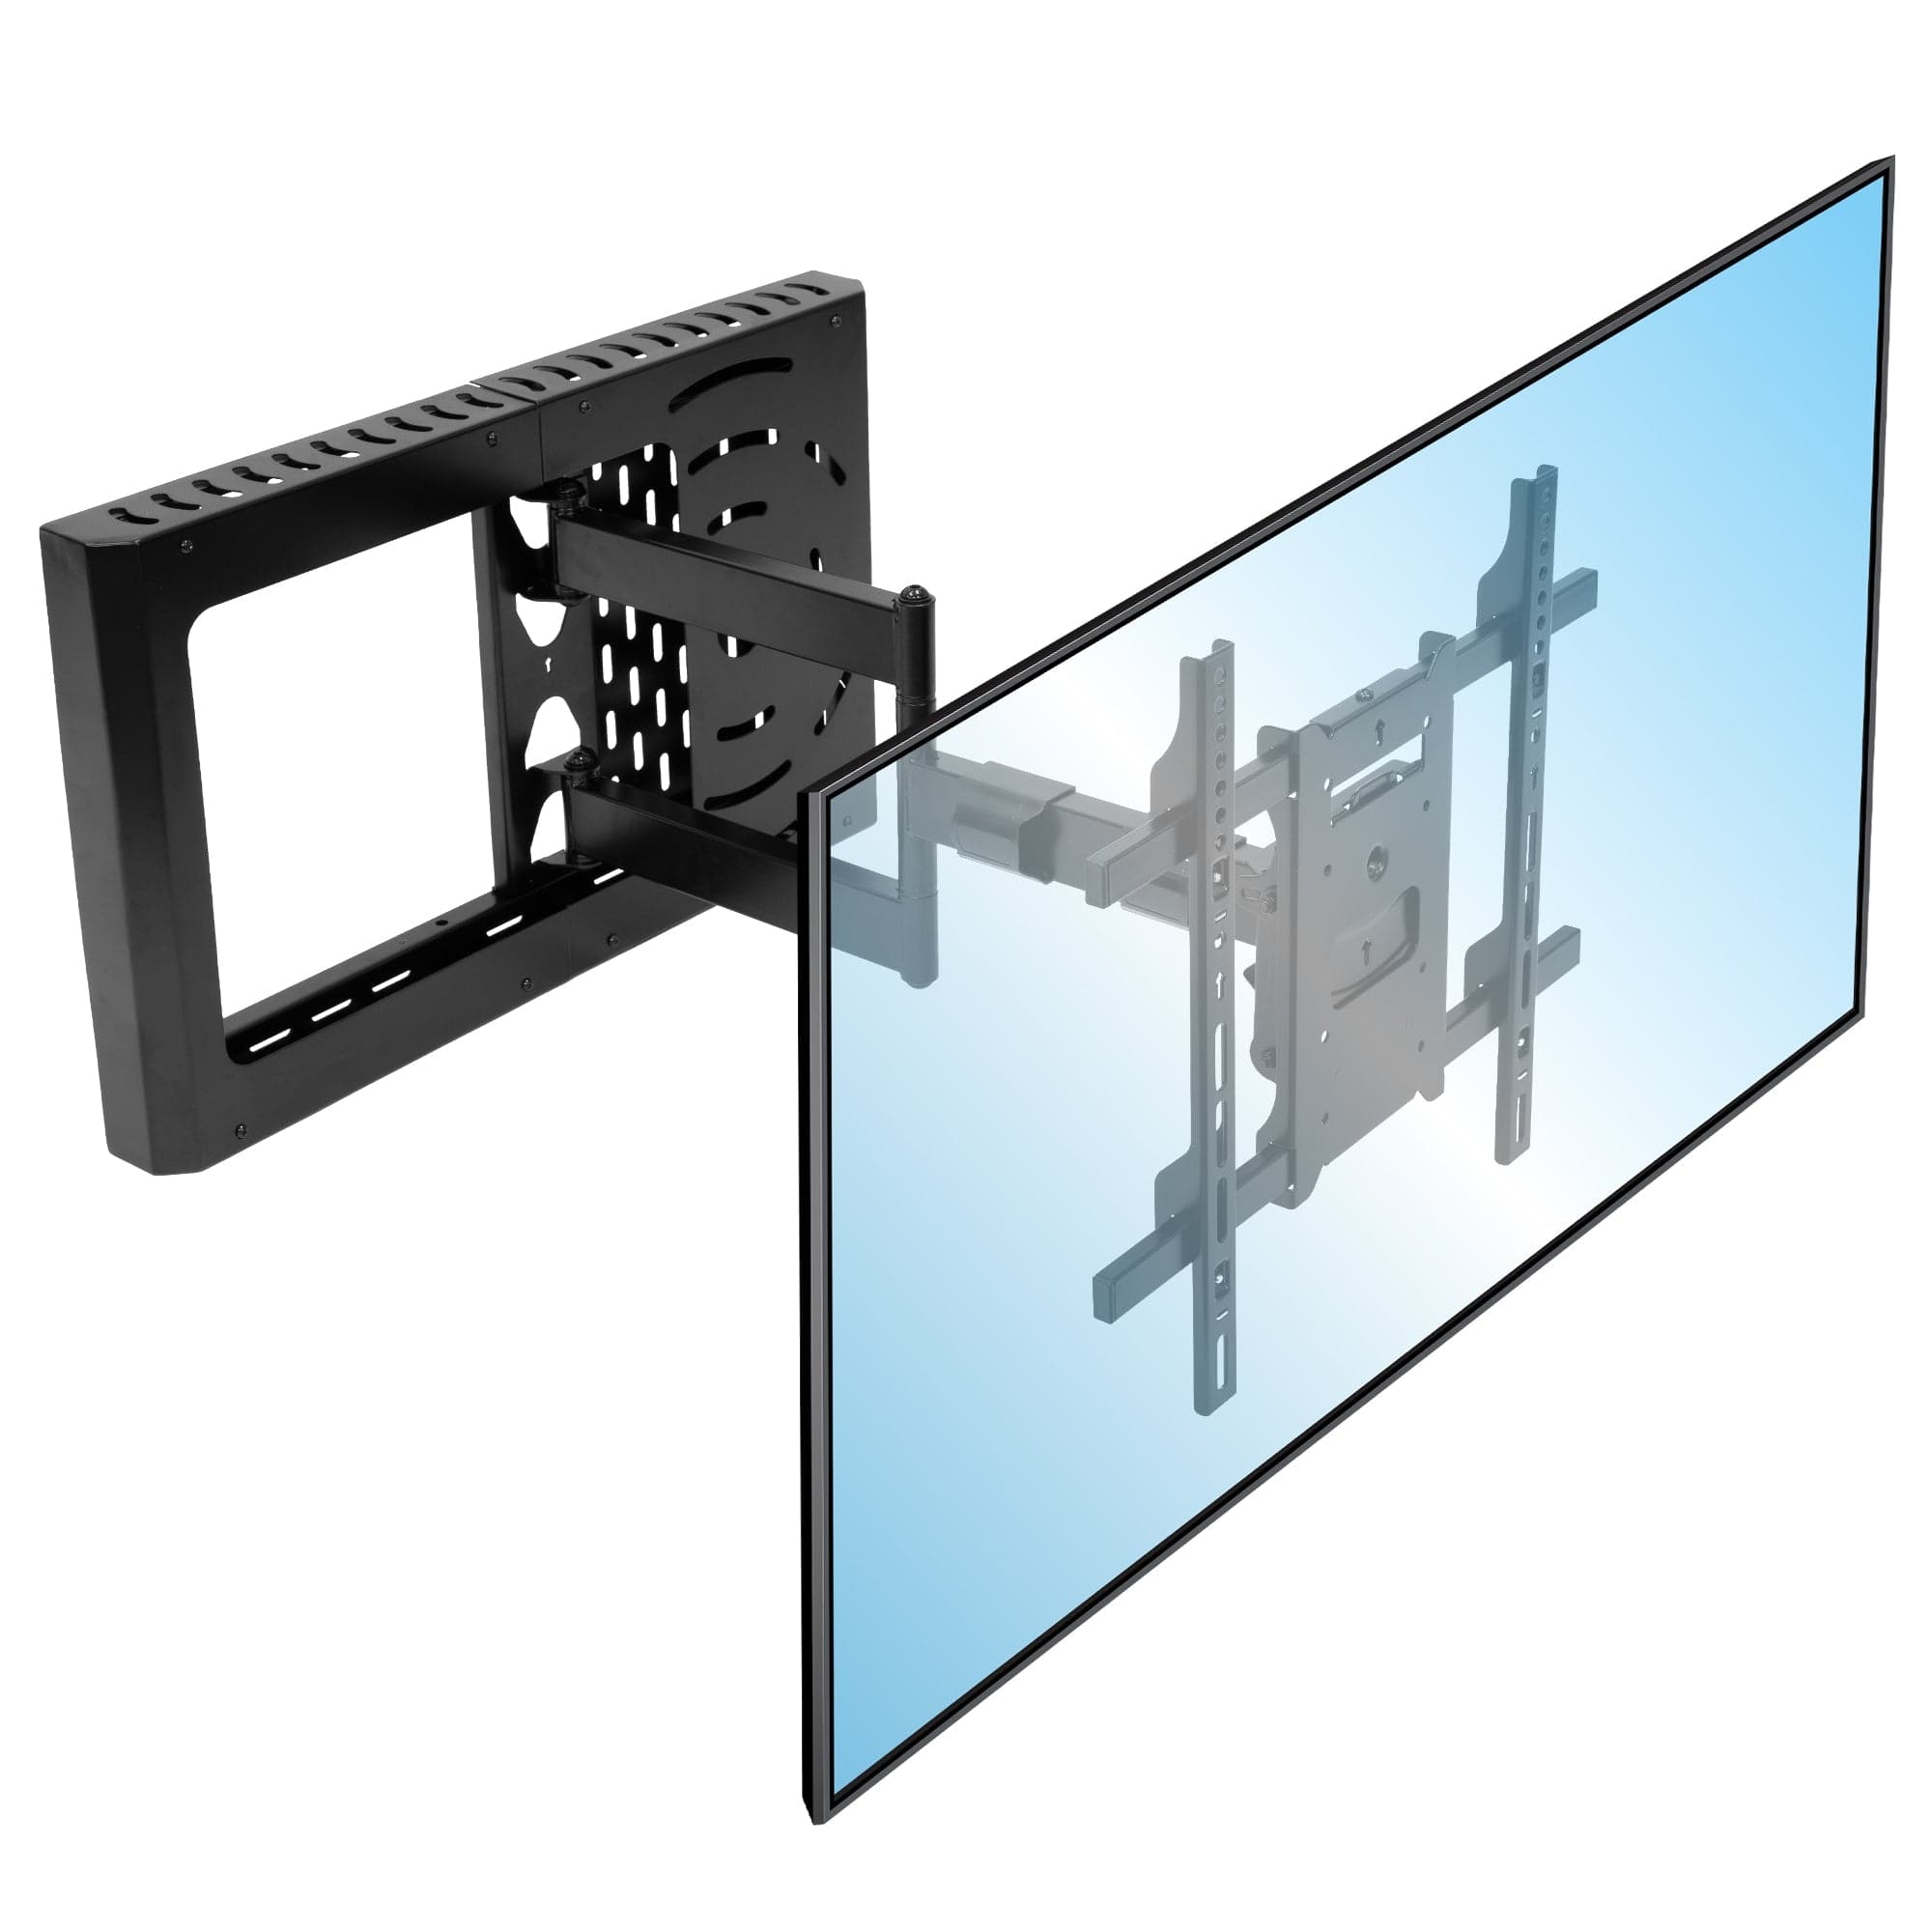 Hospitality TV Wall Mount With STB Enclosure - Mount-It!